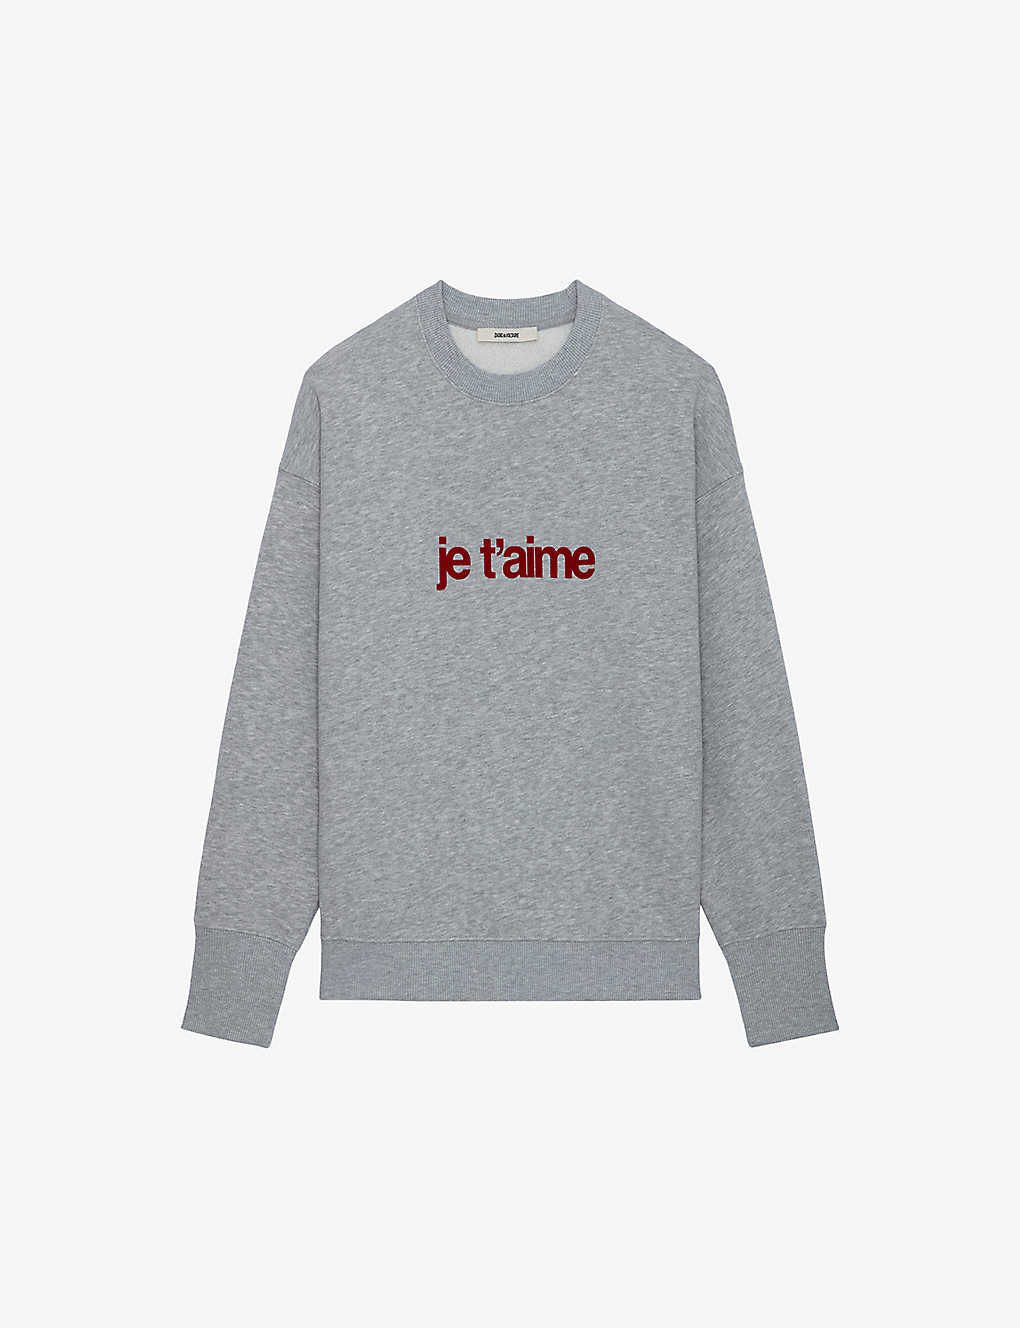 Zadig & Voltaire Zadig&voltaire Womens Gris Chine Clair Oscar Je T'aime Long-sleeve Cotton-jersey Sweatshirt